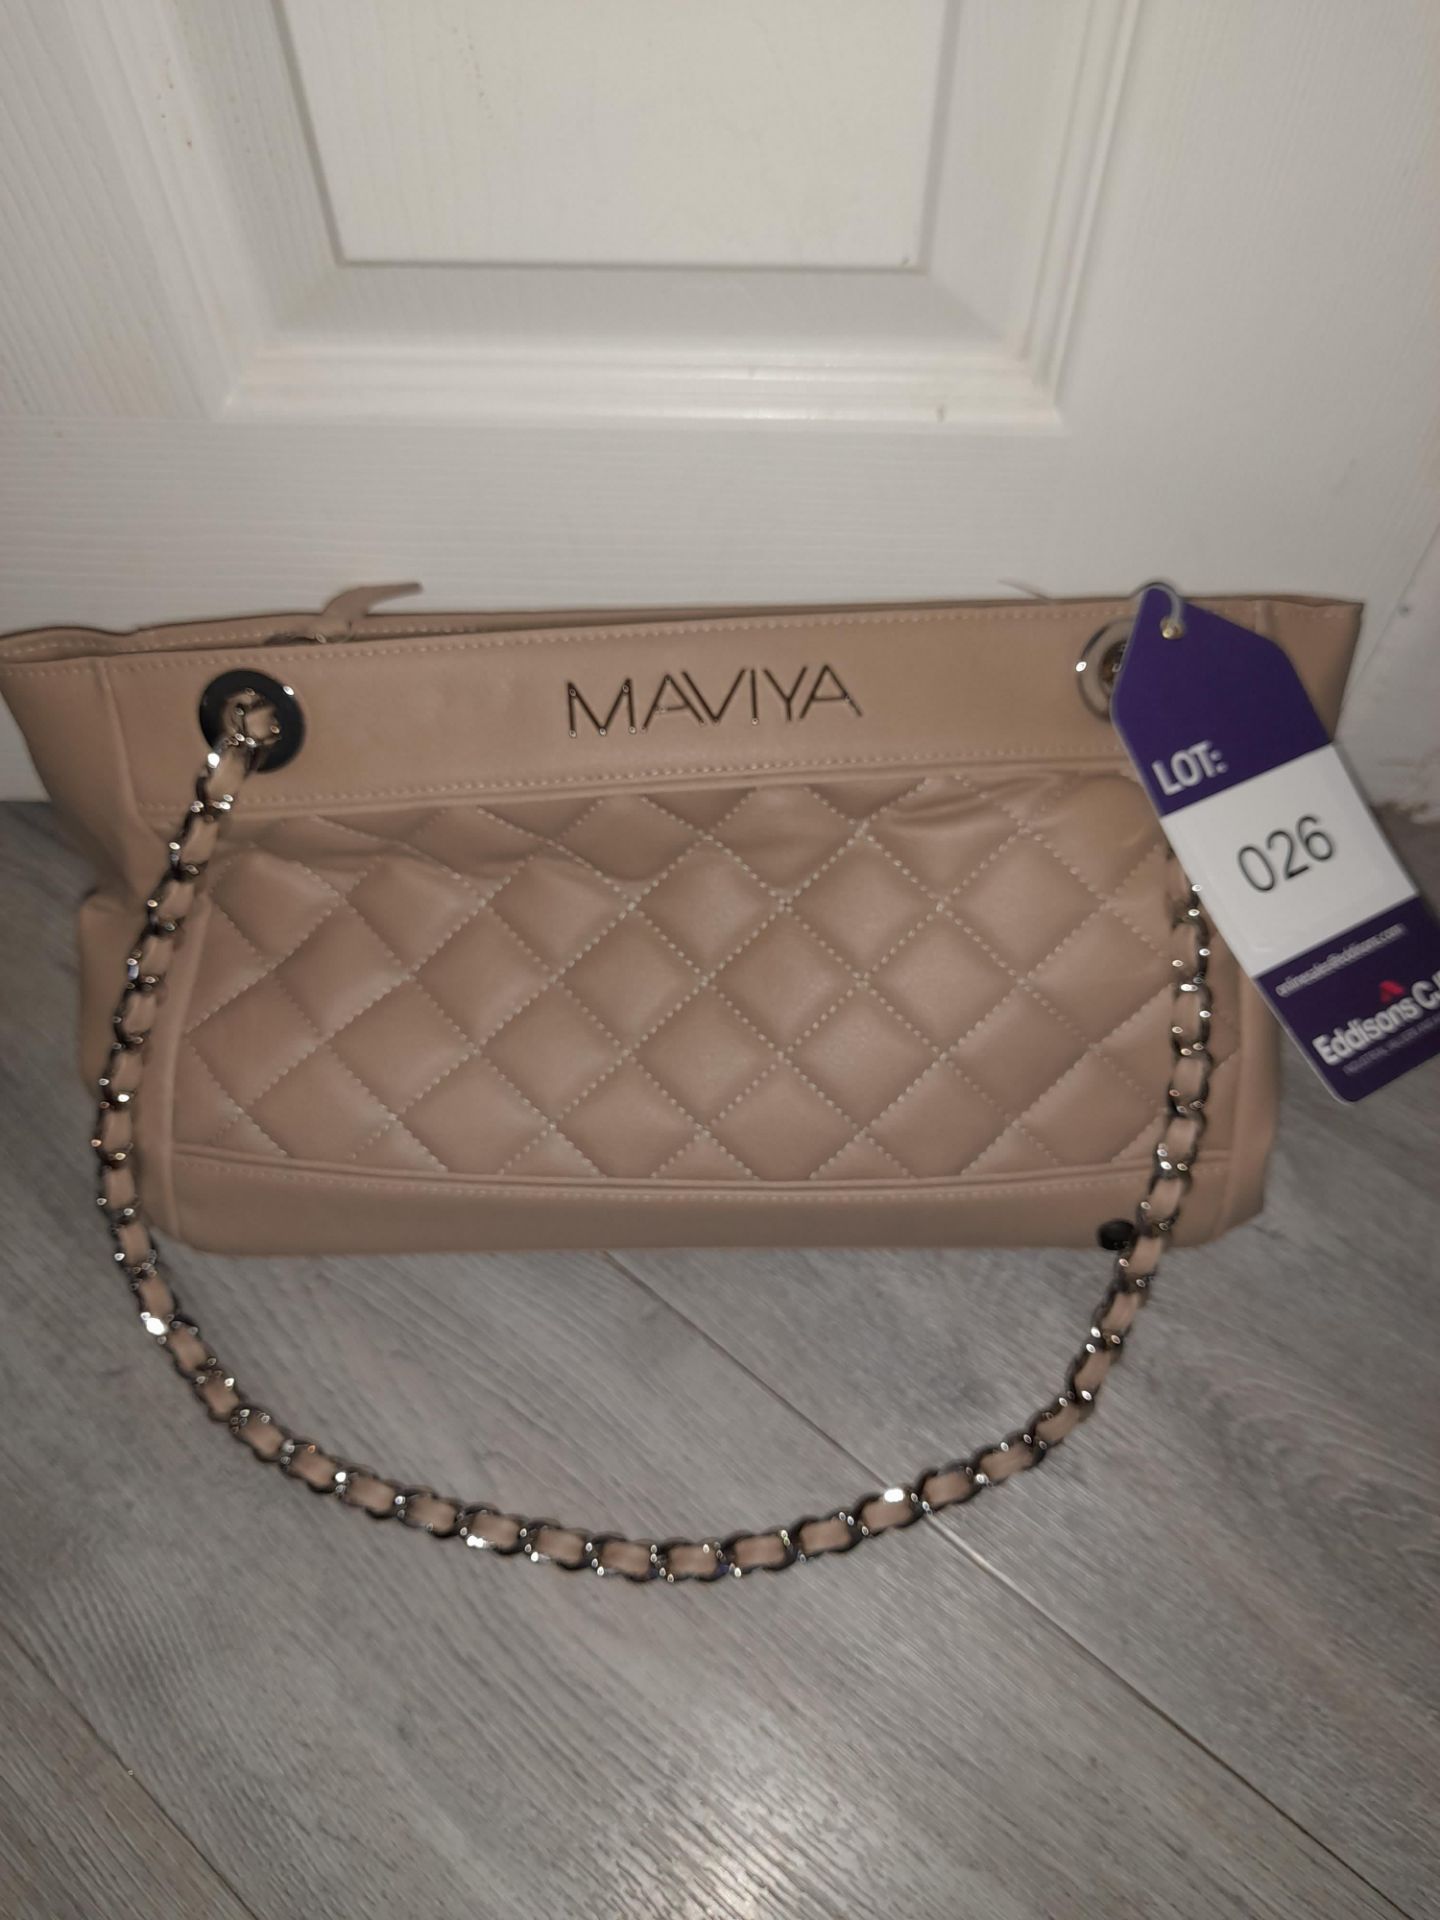 Maviya “Chicie” Cream Vegan Italian Leather Shoulder Bag with smooth finish and quilted effect, faux